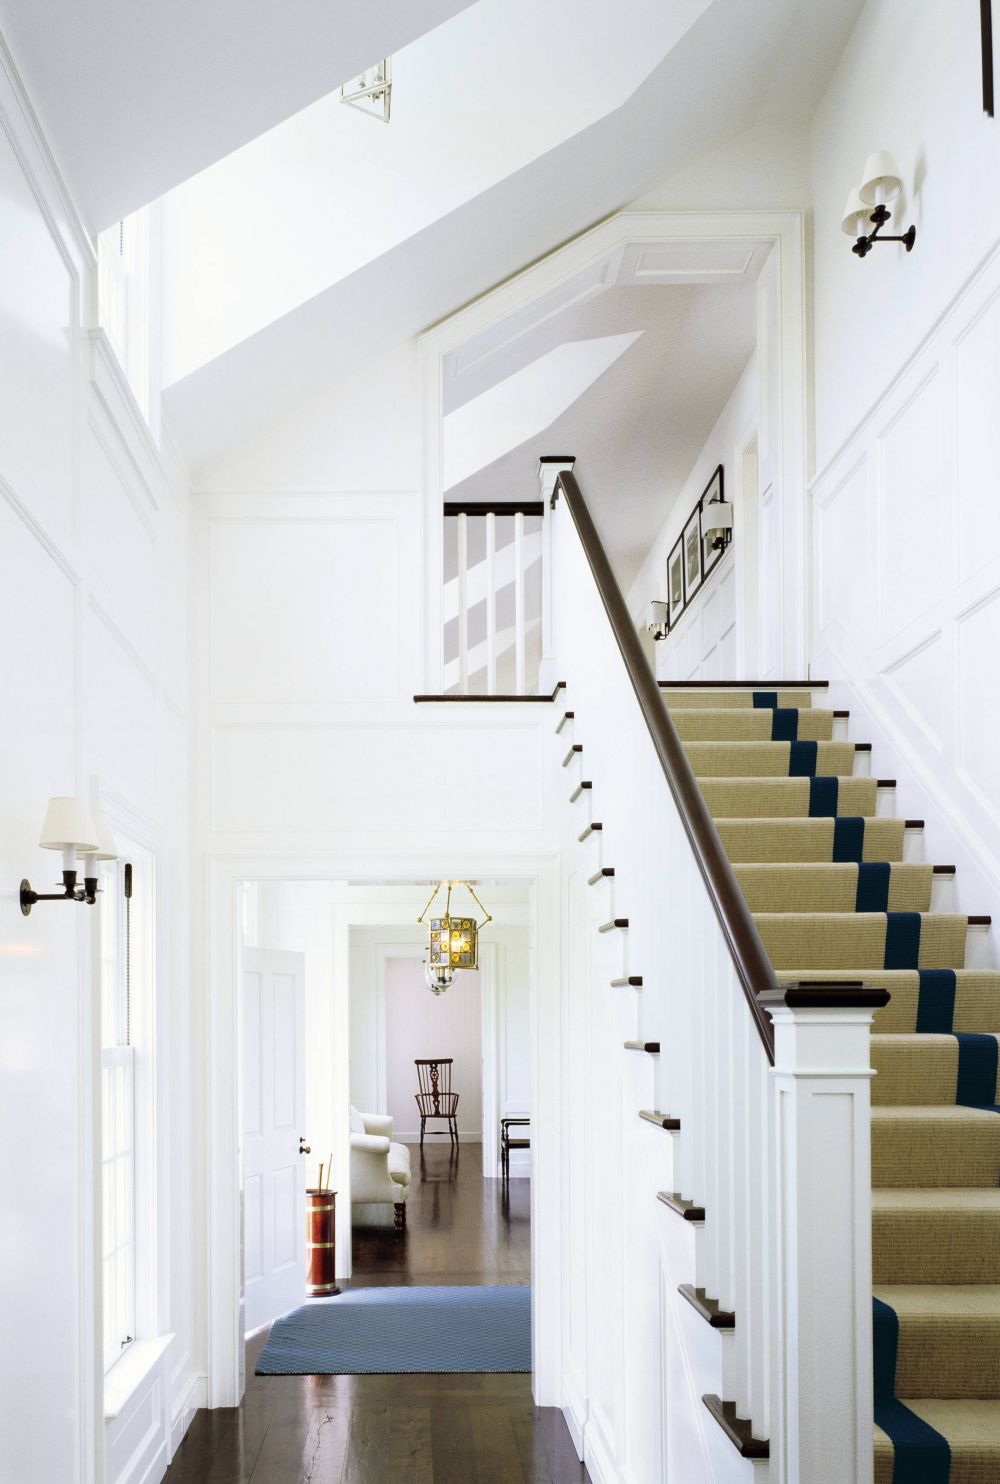 Light floods through dormer windows into the double-height stair hall of an 8000 square foot Nantucket home